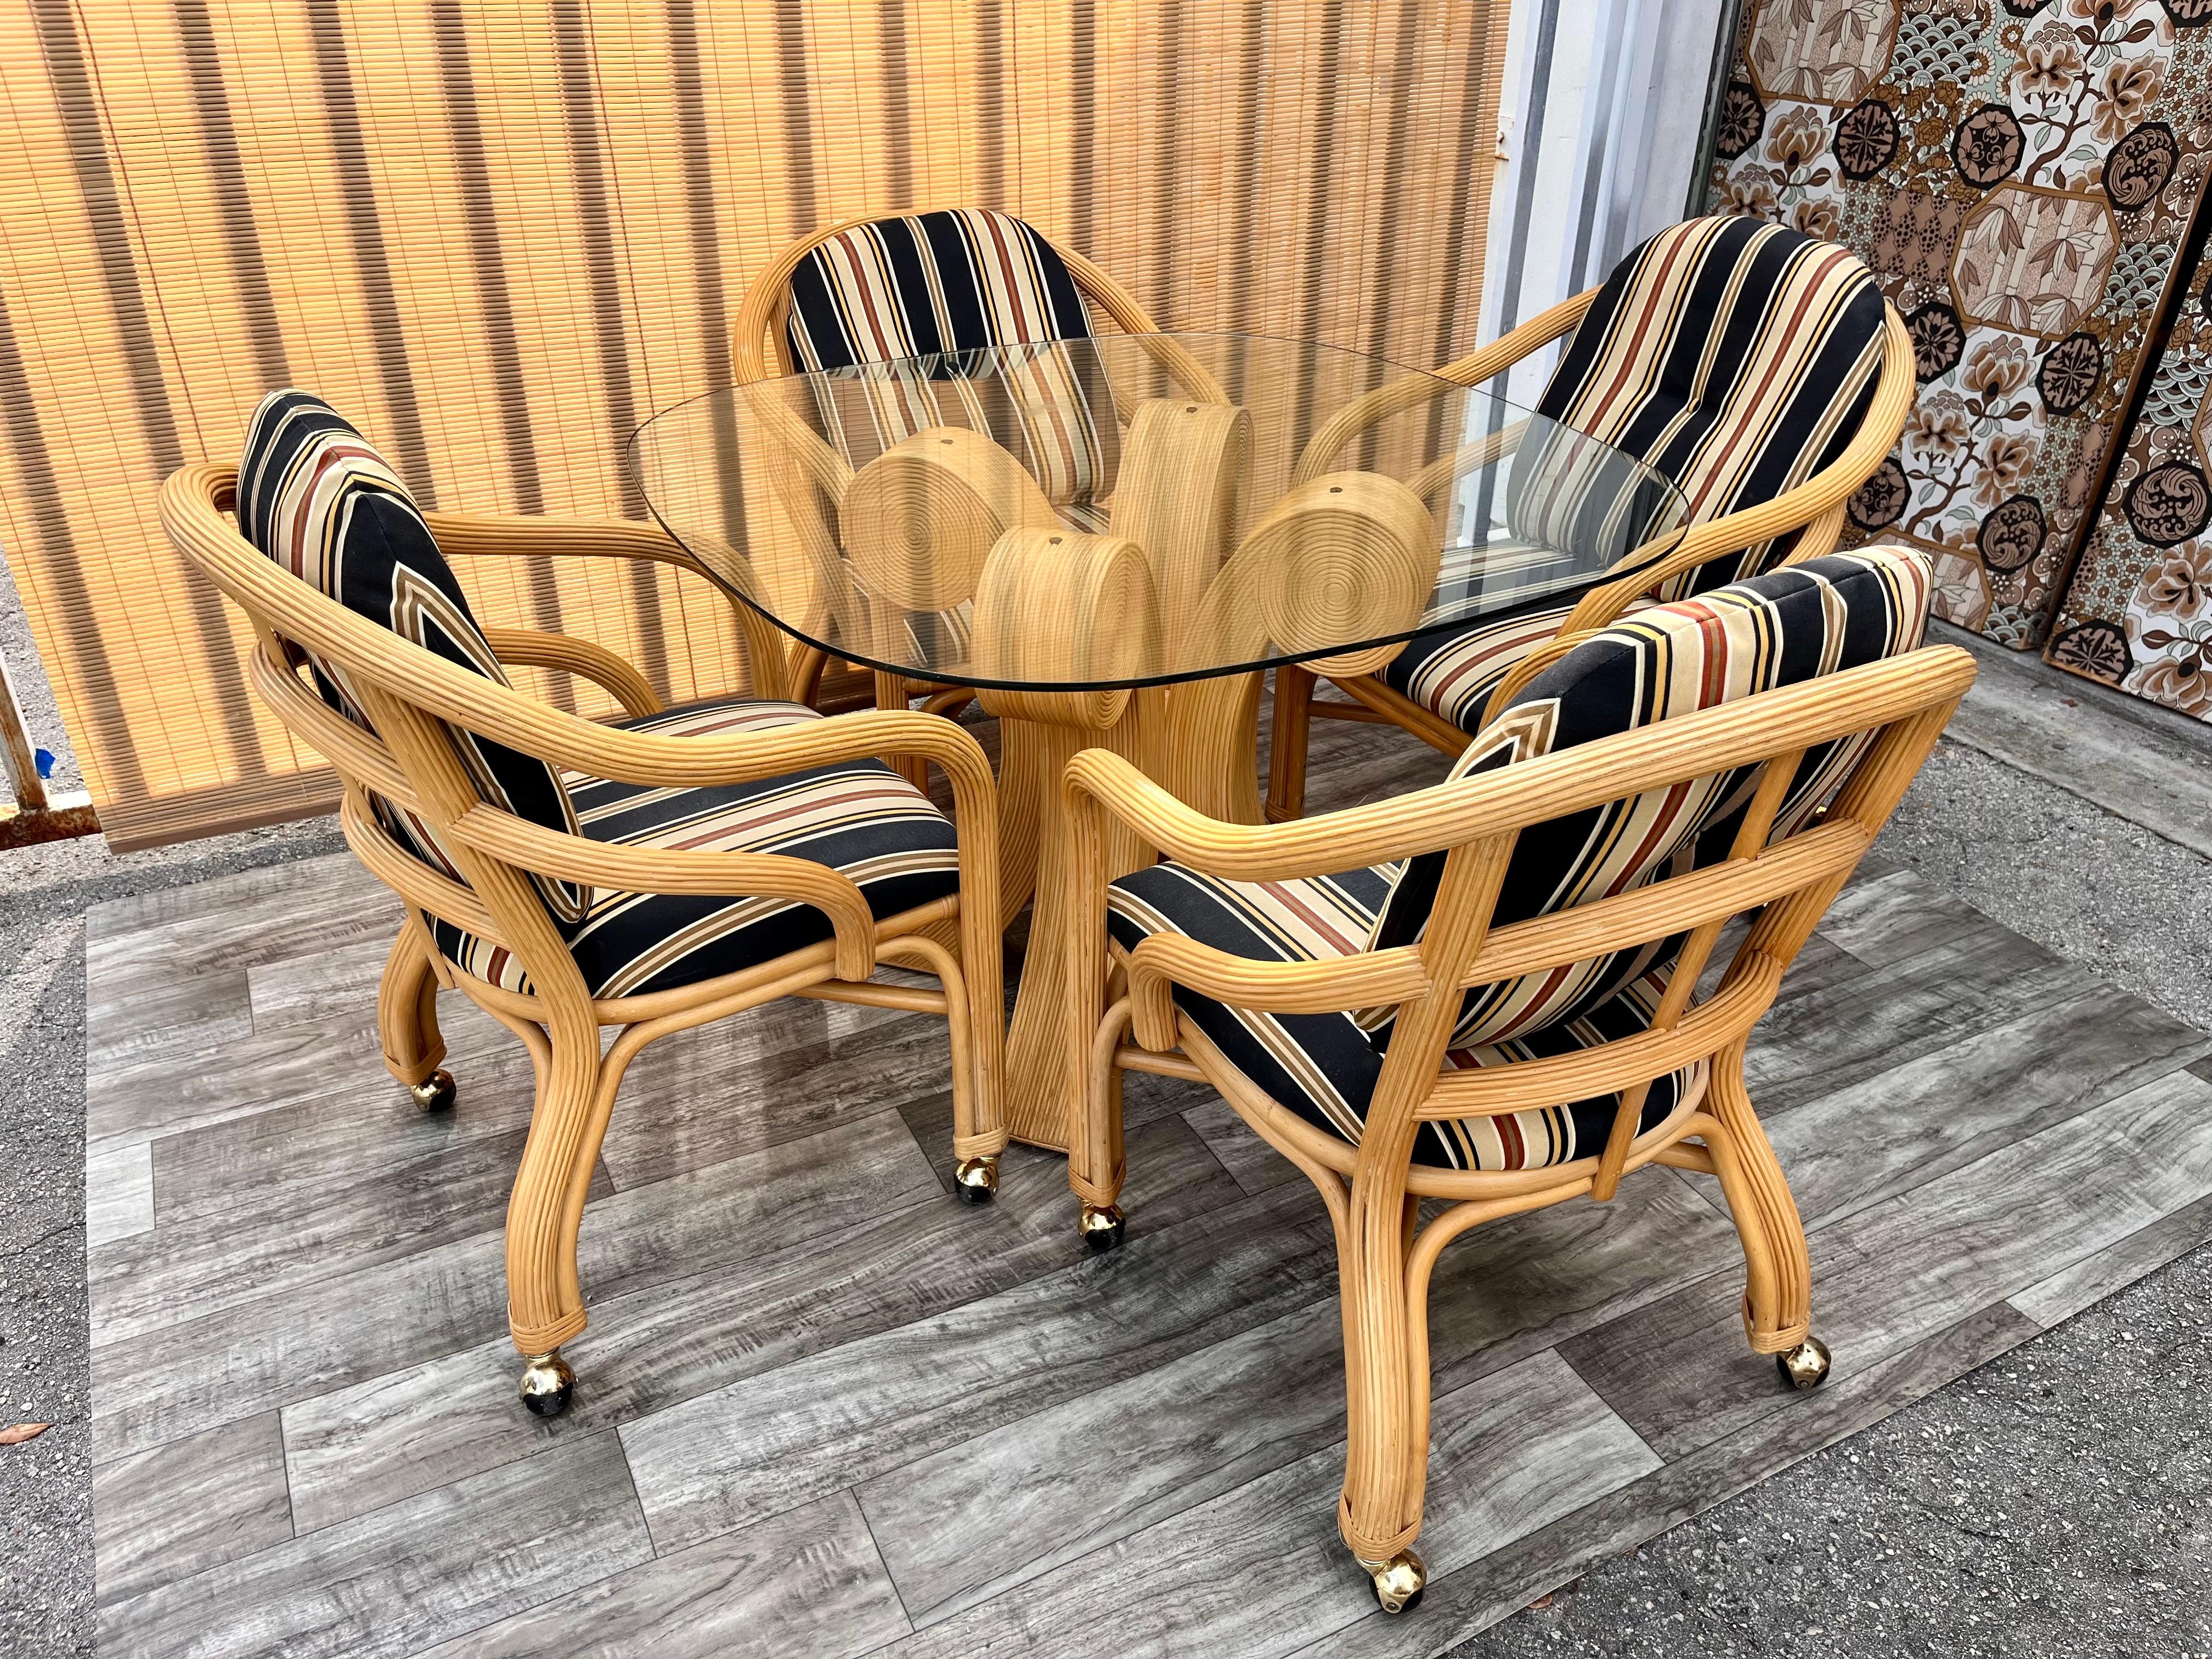 Vintage 5 pieces coastal style pencil reed dining / game set. Circa 1980s 
The Table features an intricate Pencil Reed Pedestal in a natural finish with a round beveled glass top that comfortably seat 4 guests. 
The chairs feature come with what